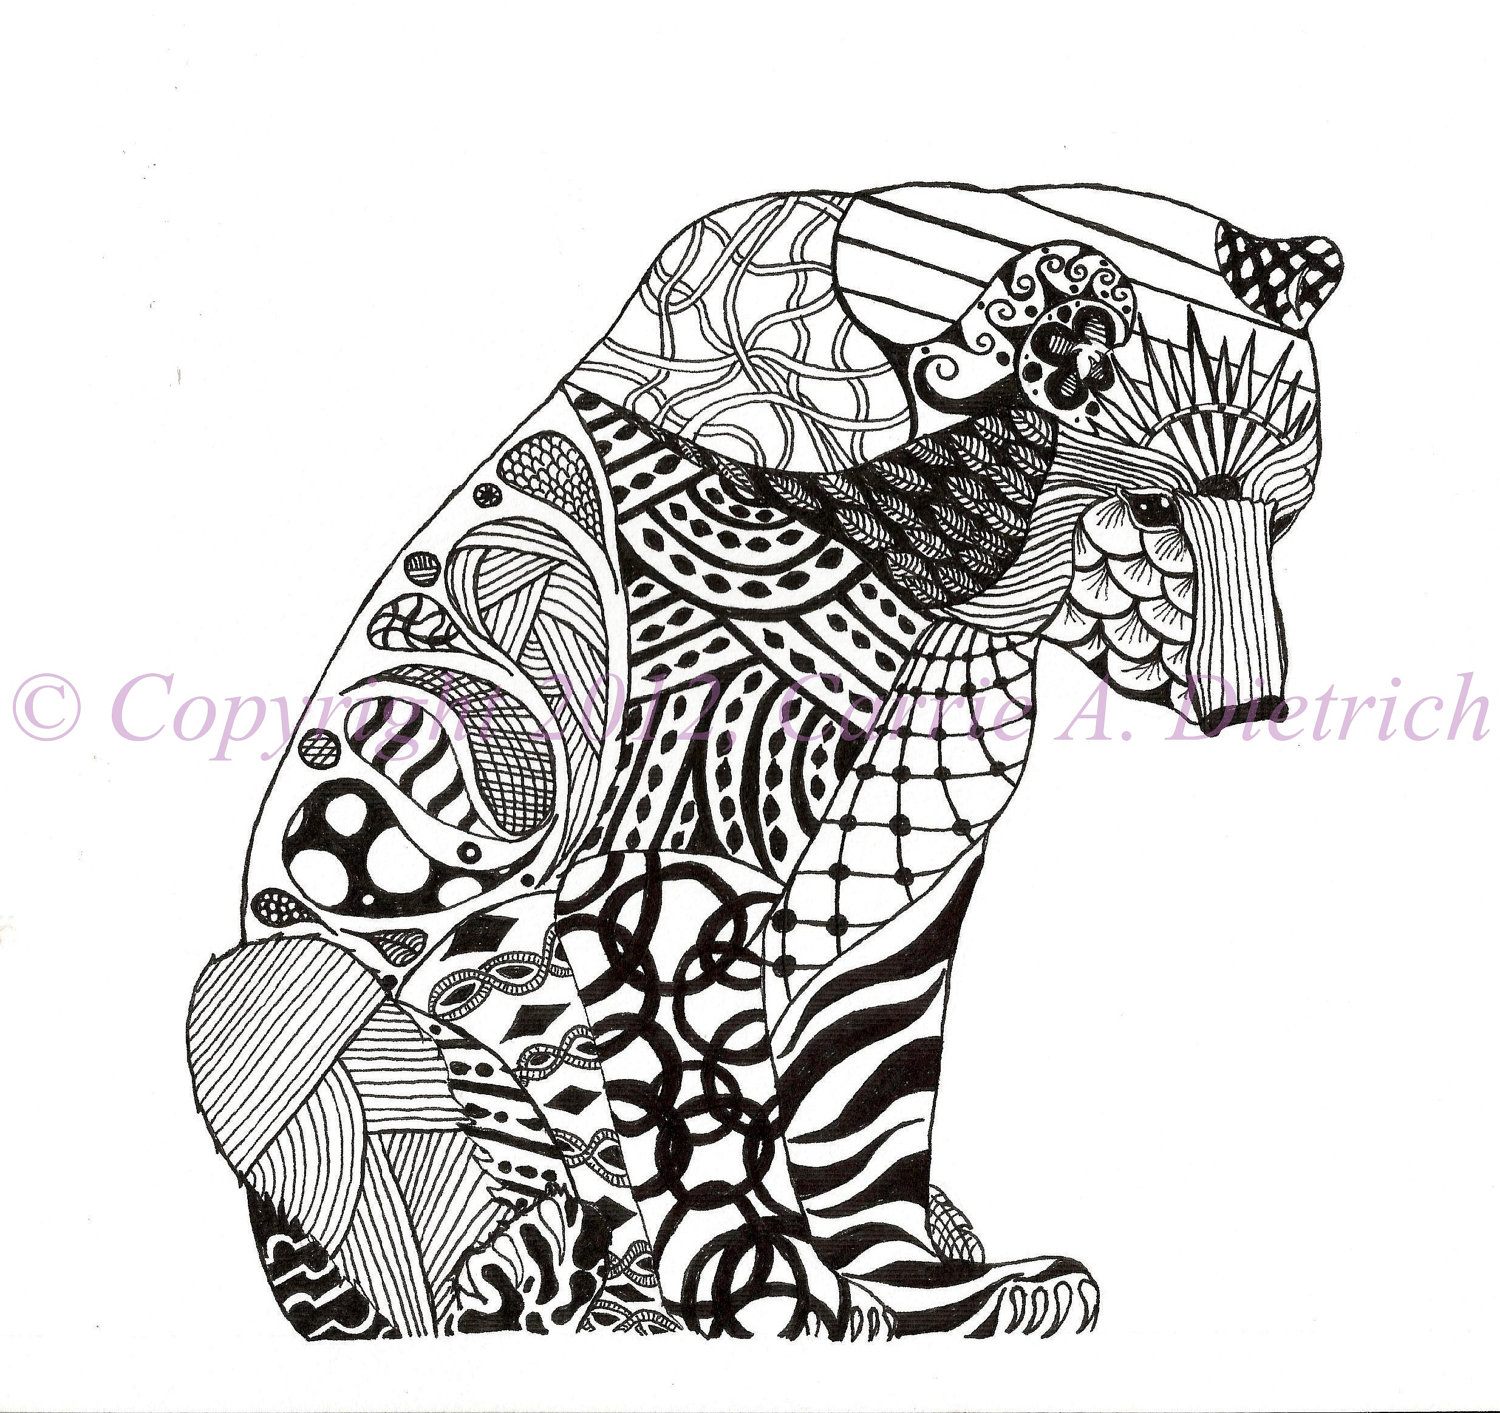 Black and White Animal Drawings